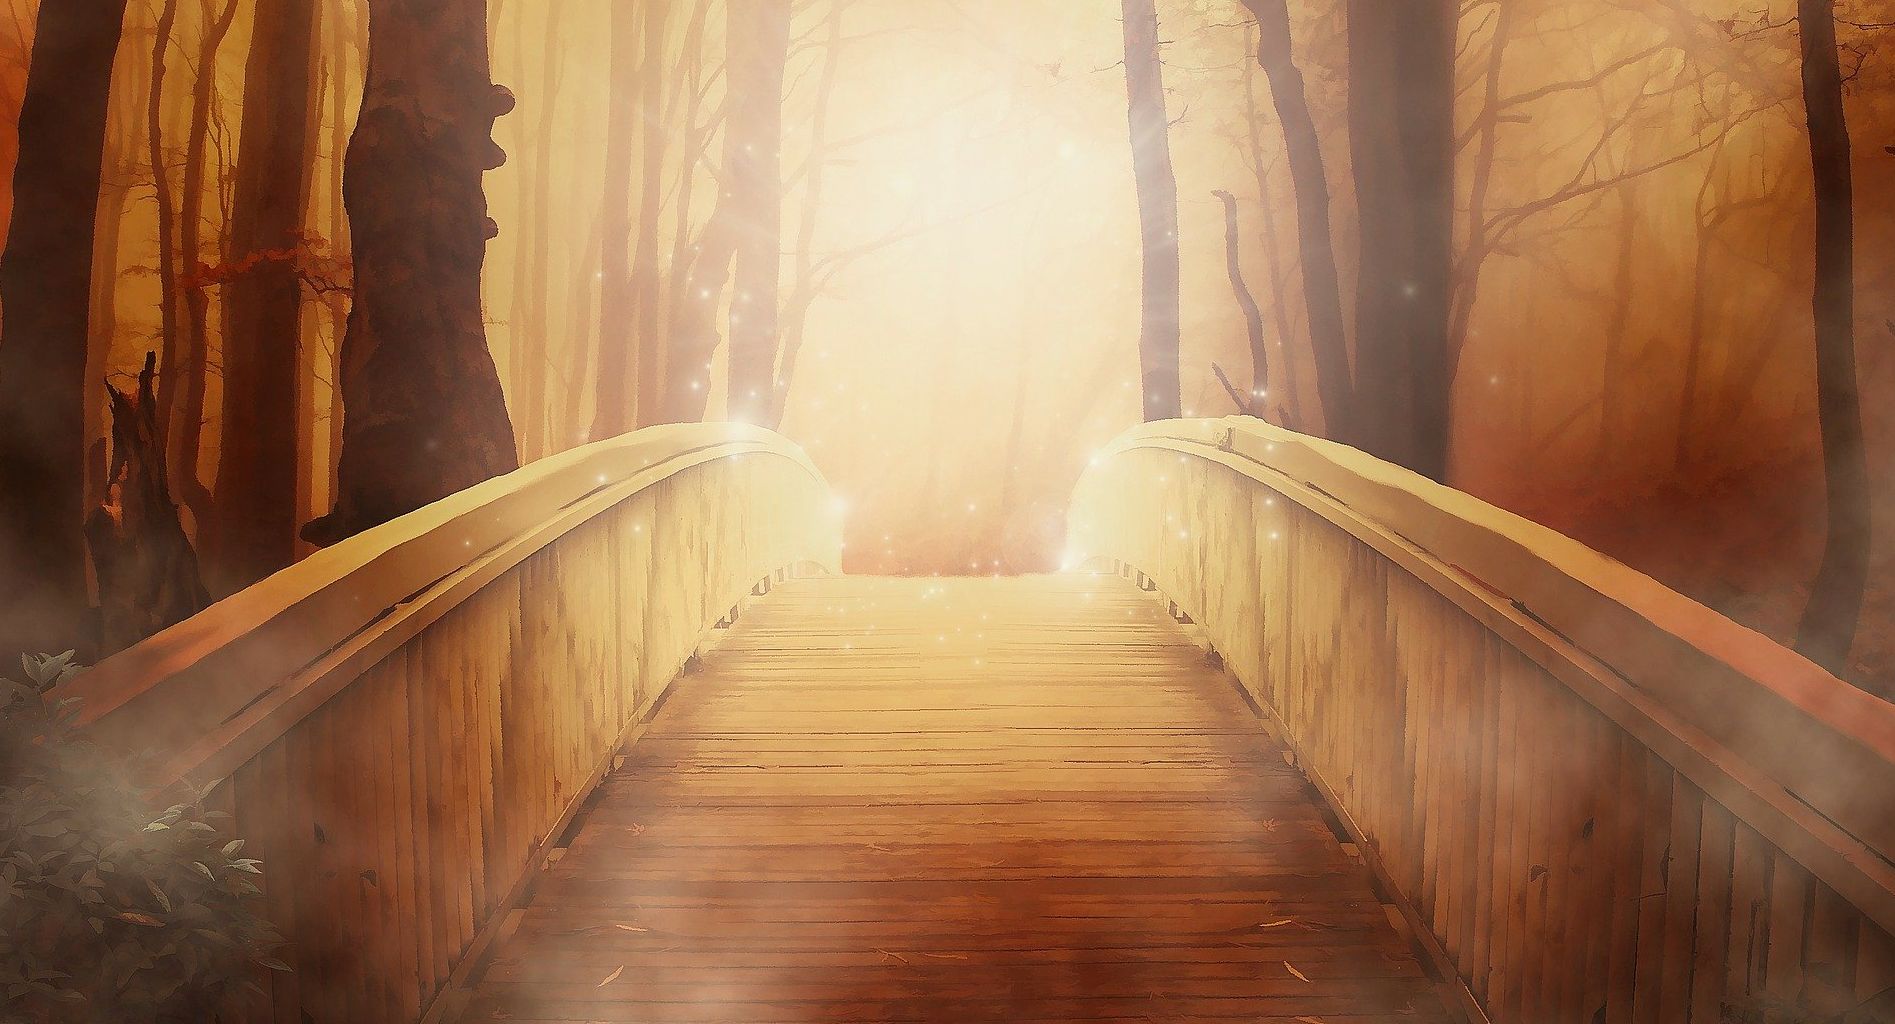 A wooden bridge illuminated at the end.